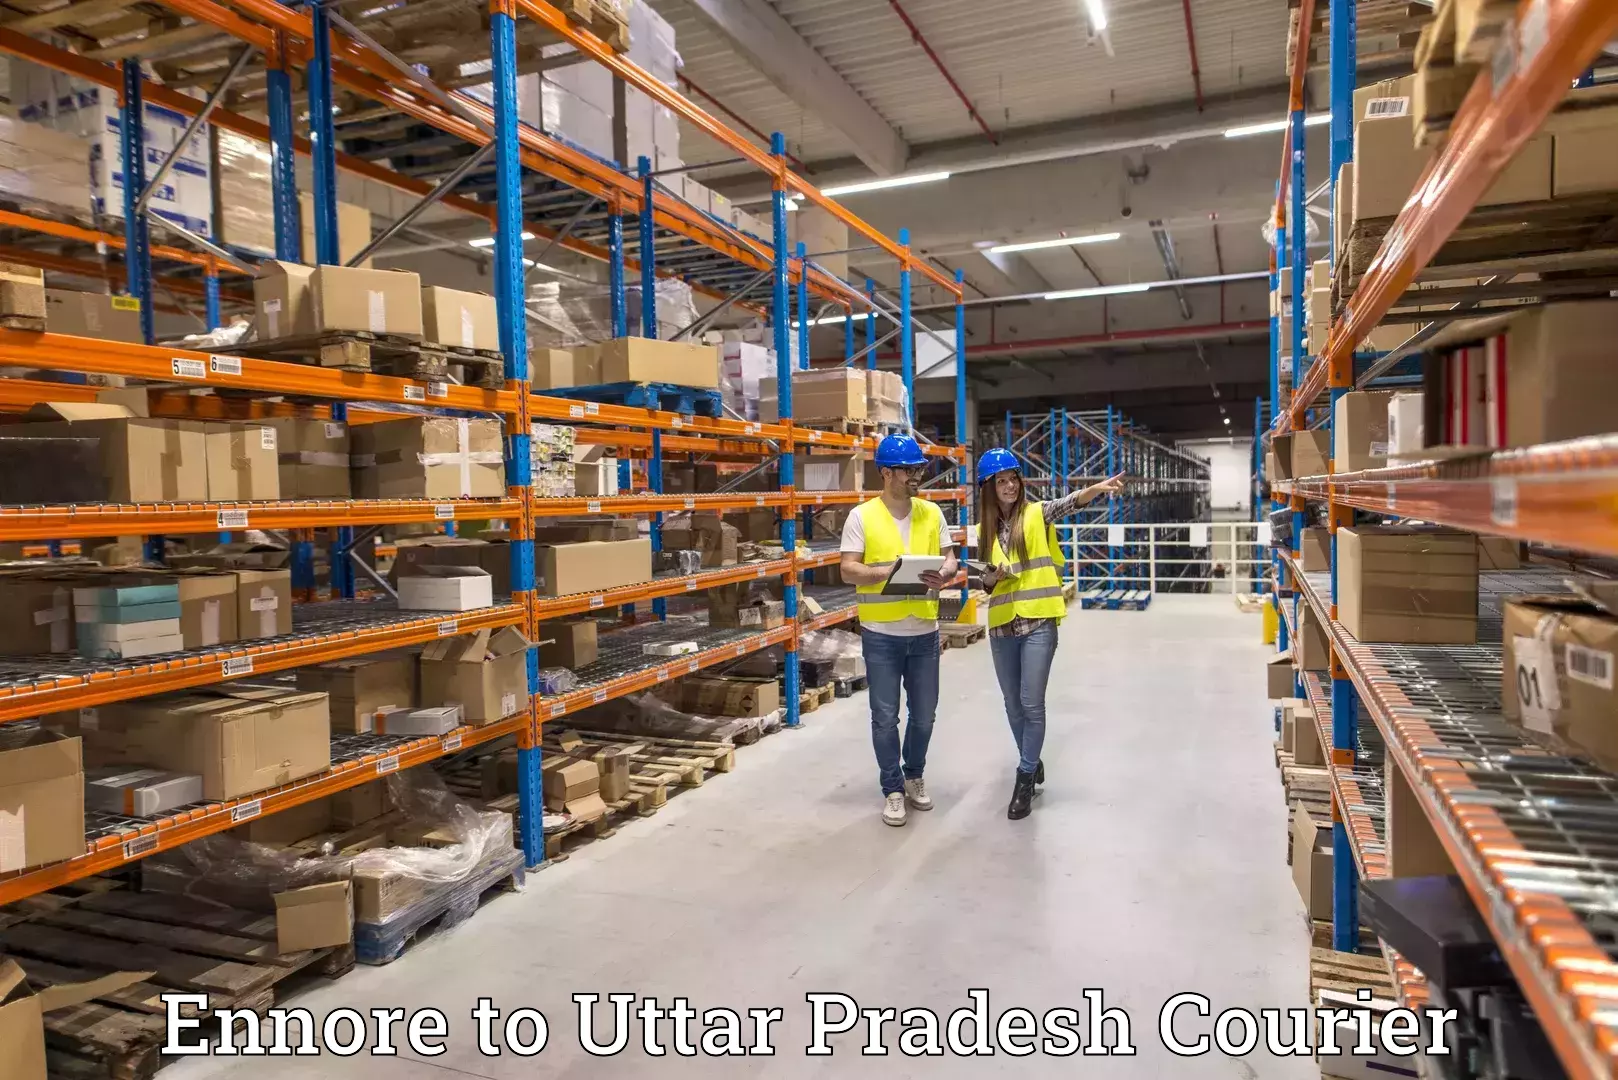 Customizable delivery plans Ennore to Utraula